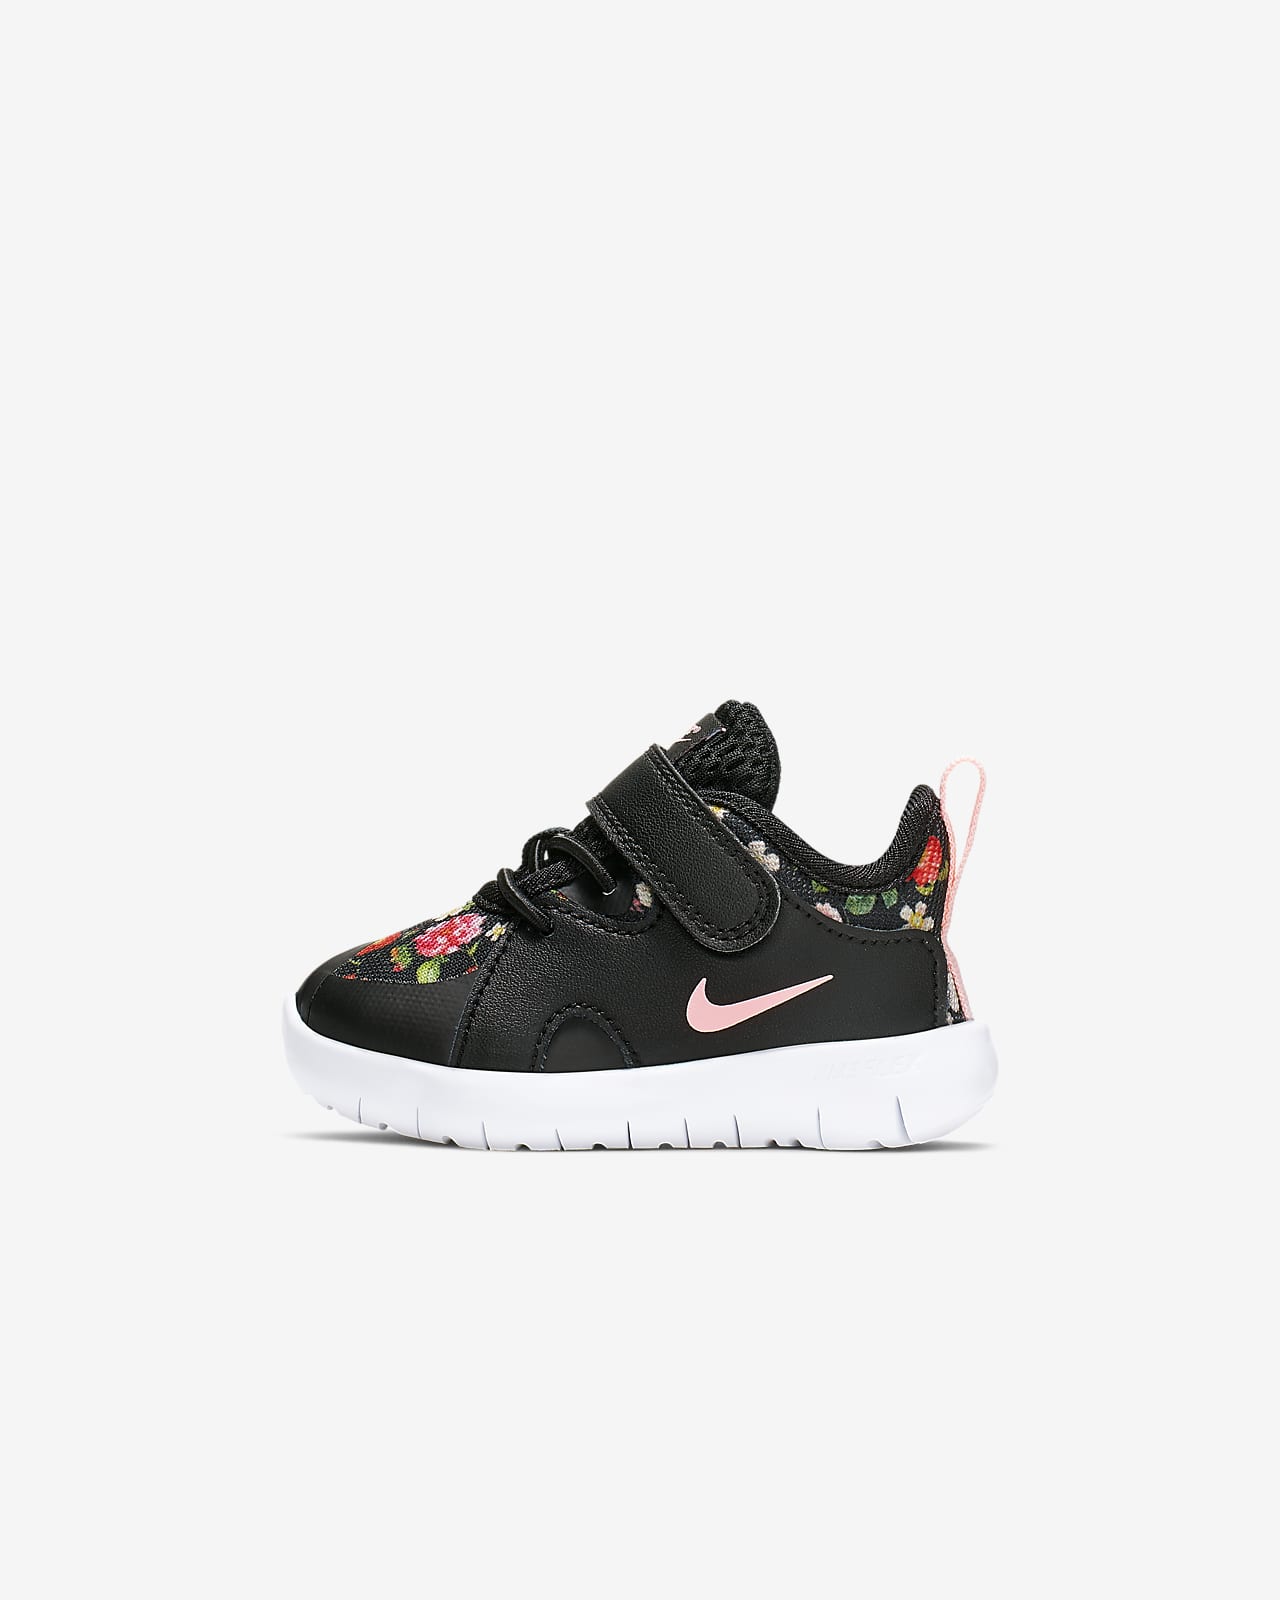 nike tennis floral shoes